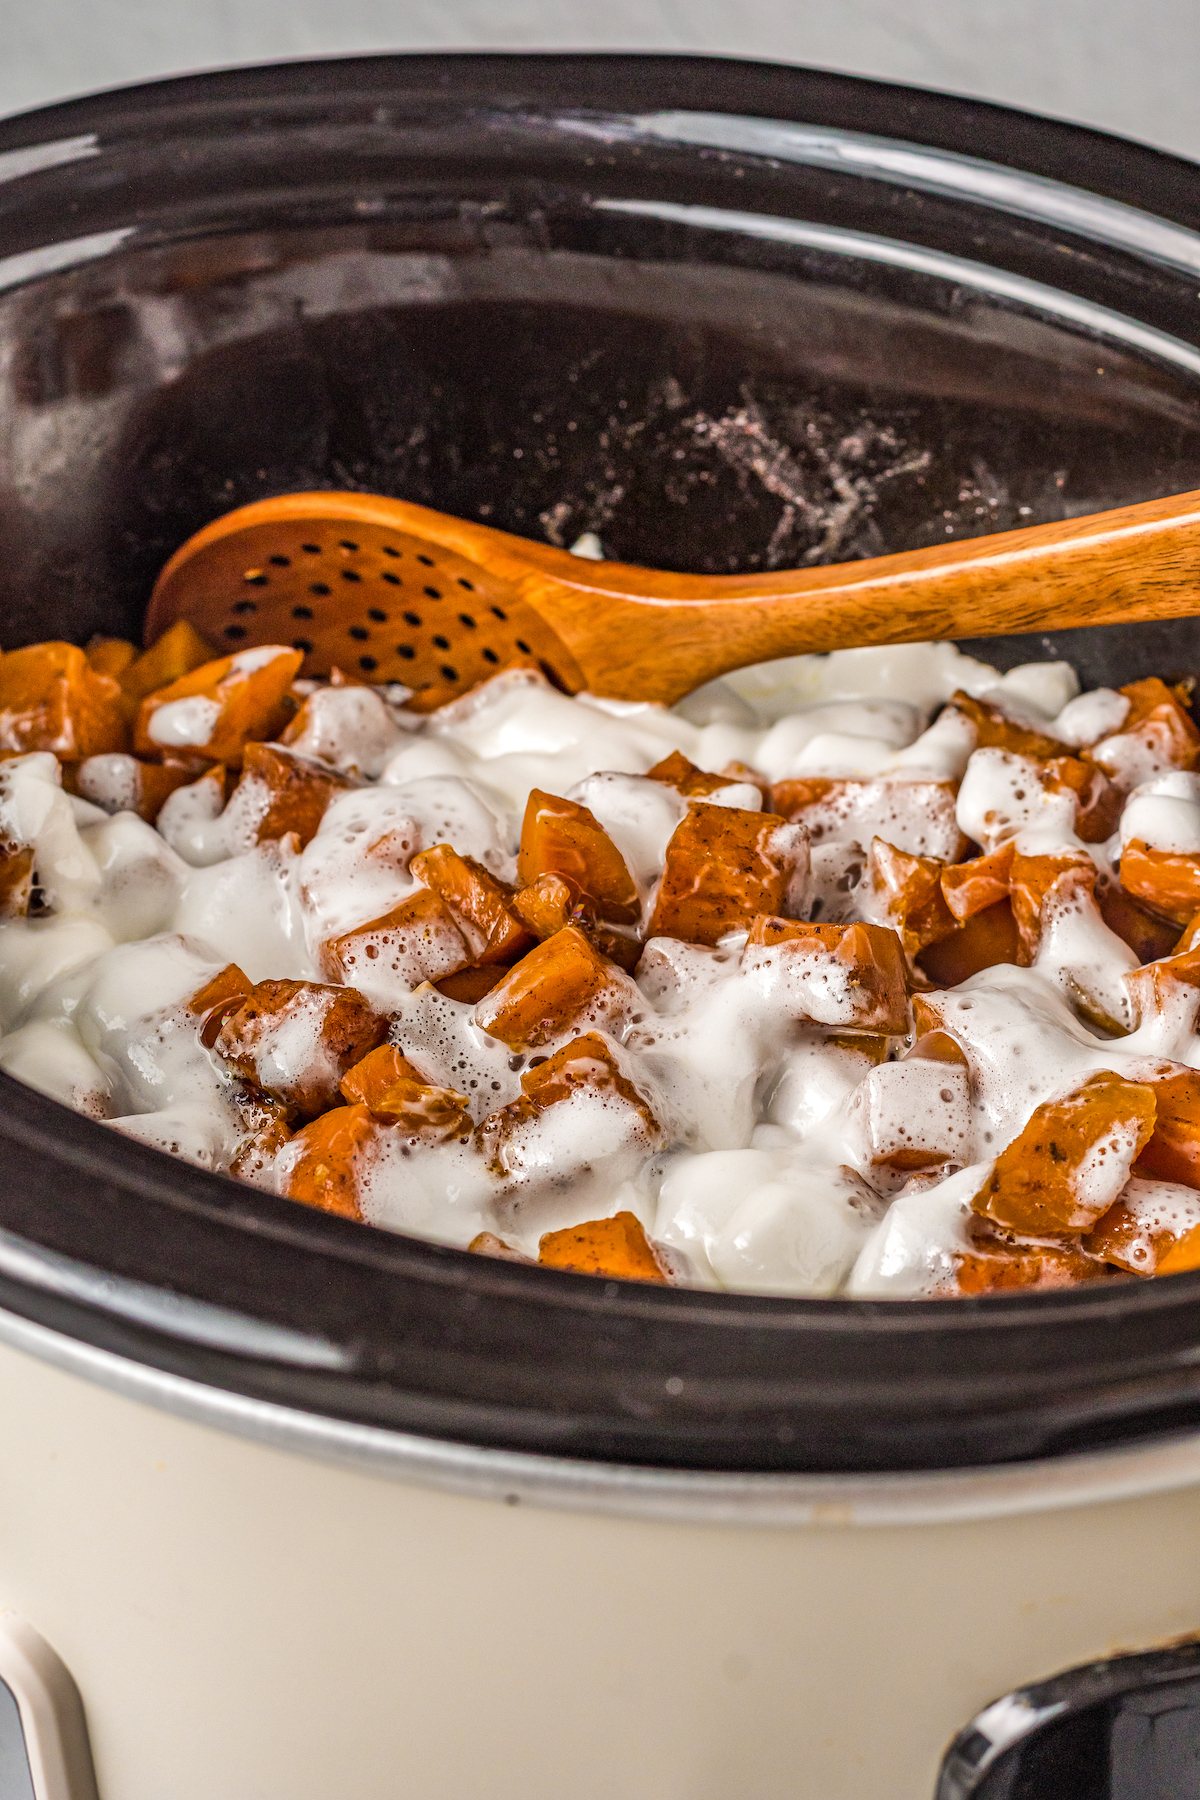 cubed sweet potatoes with melted mini marshmallows on top in a crockpot